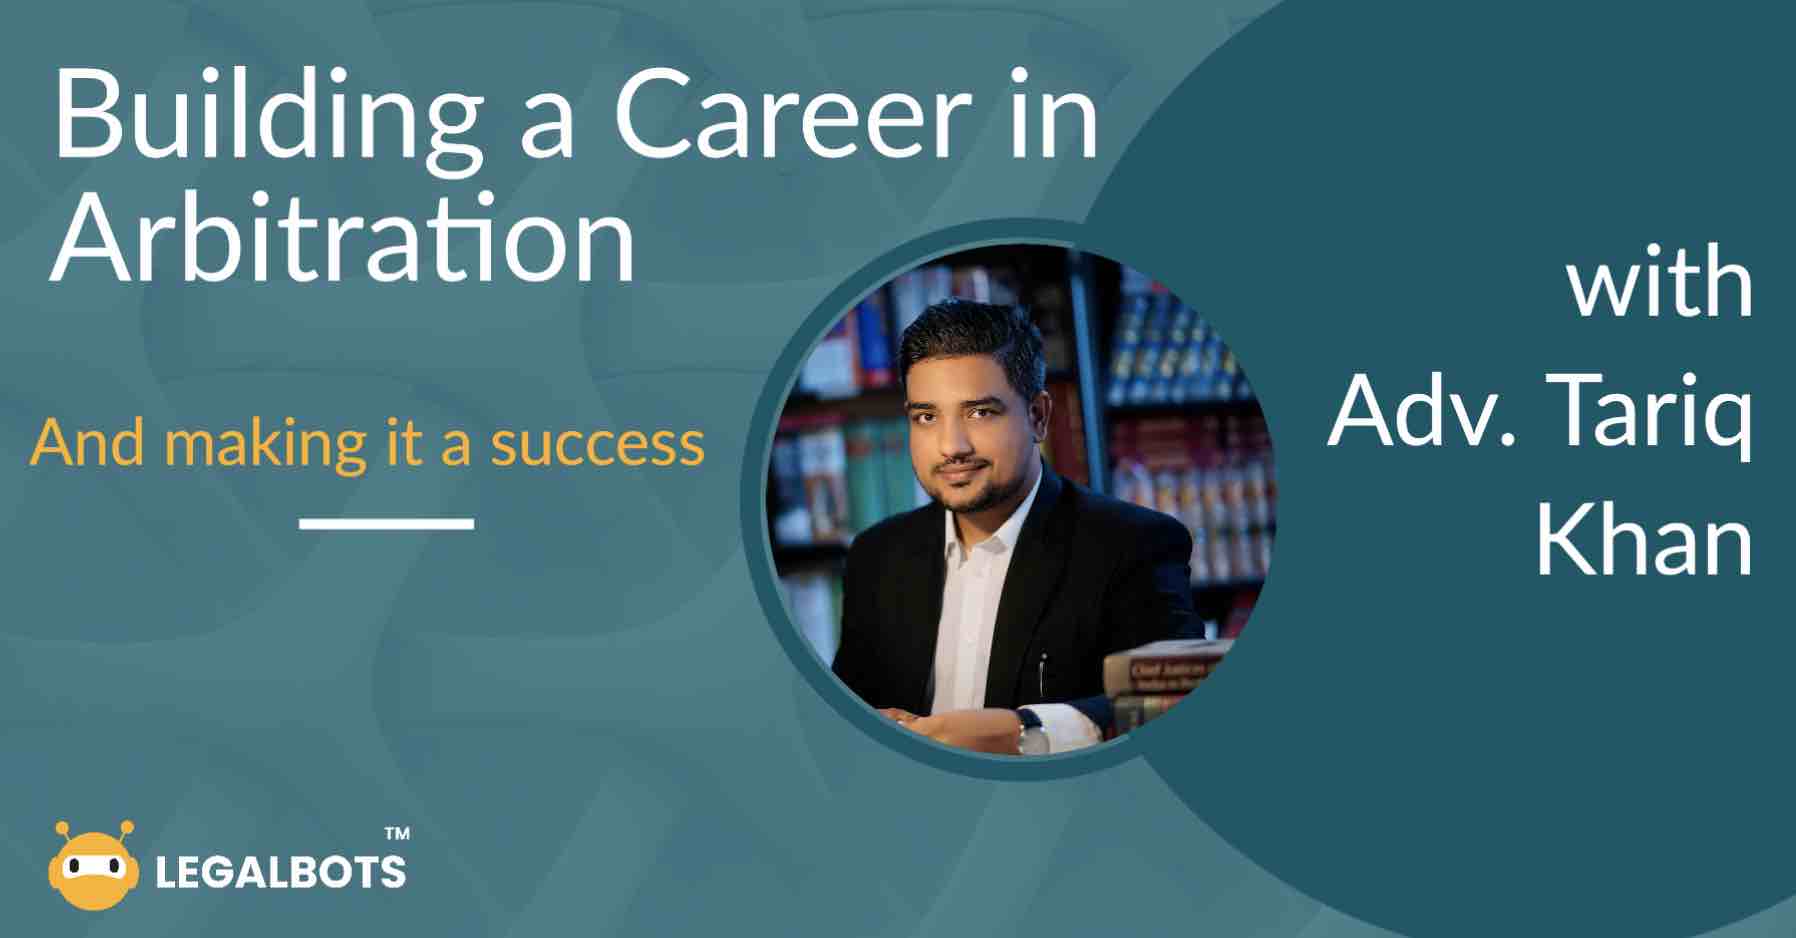 Building a Career in Arbitration - Insights from Adv Tariq Khan